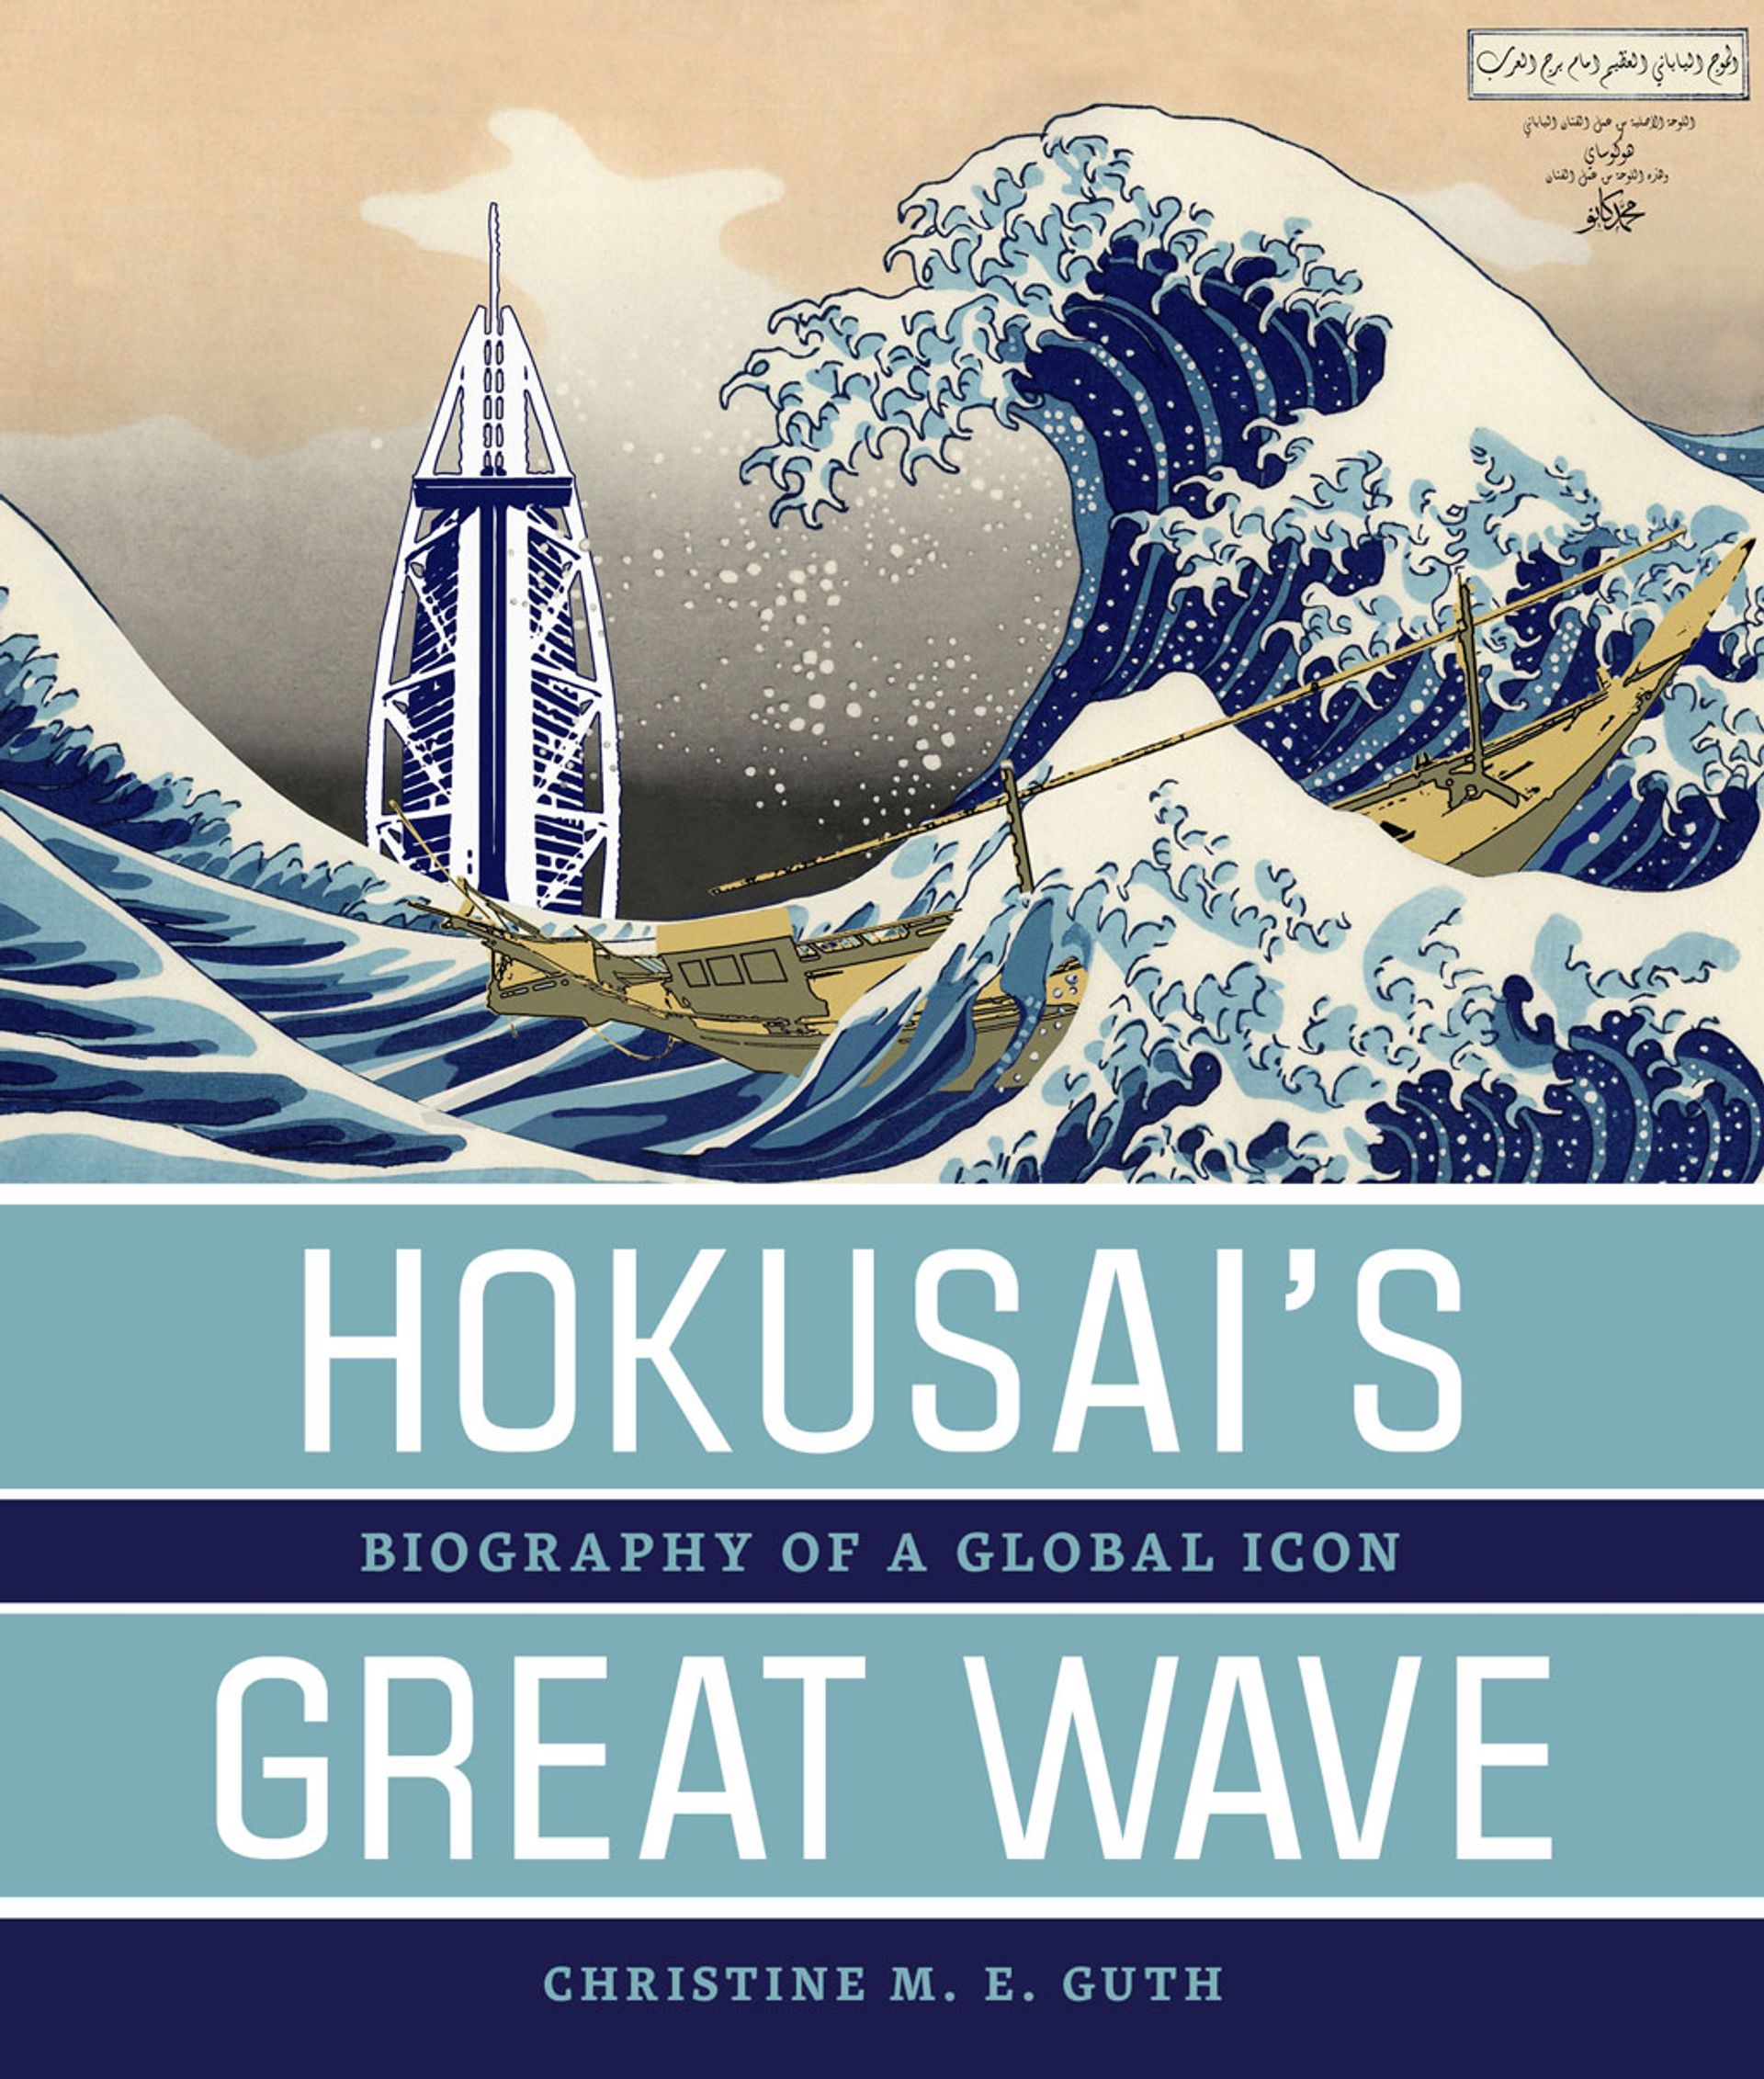 An expert's guide to Hokusai: four must-read books on the Japanese